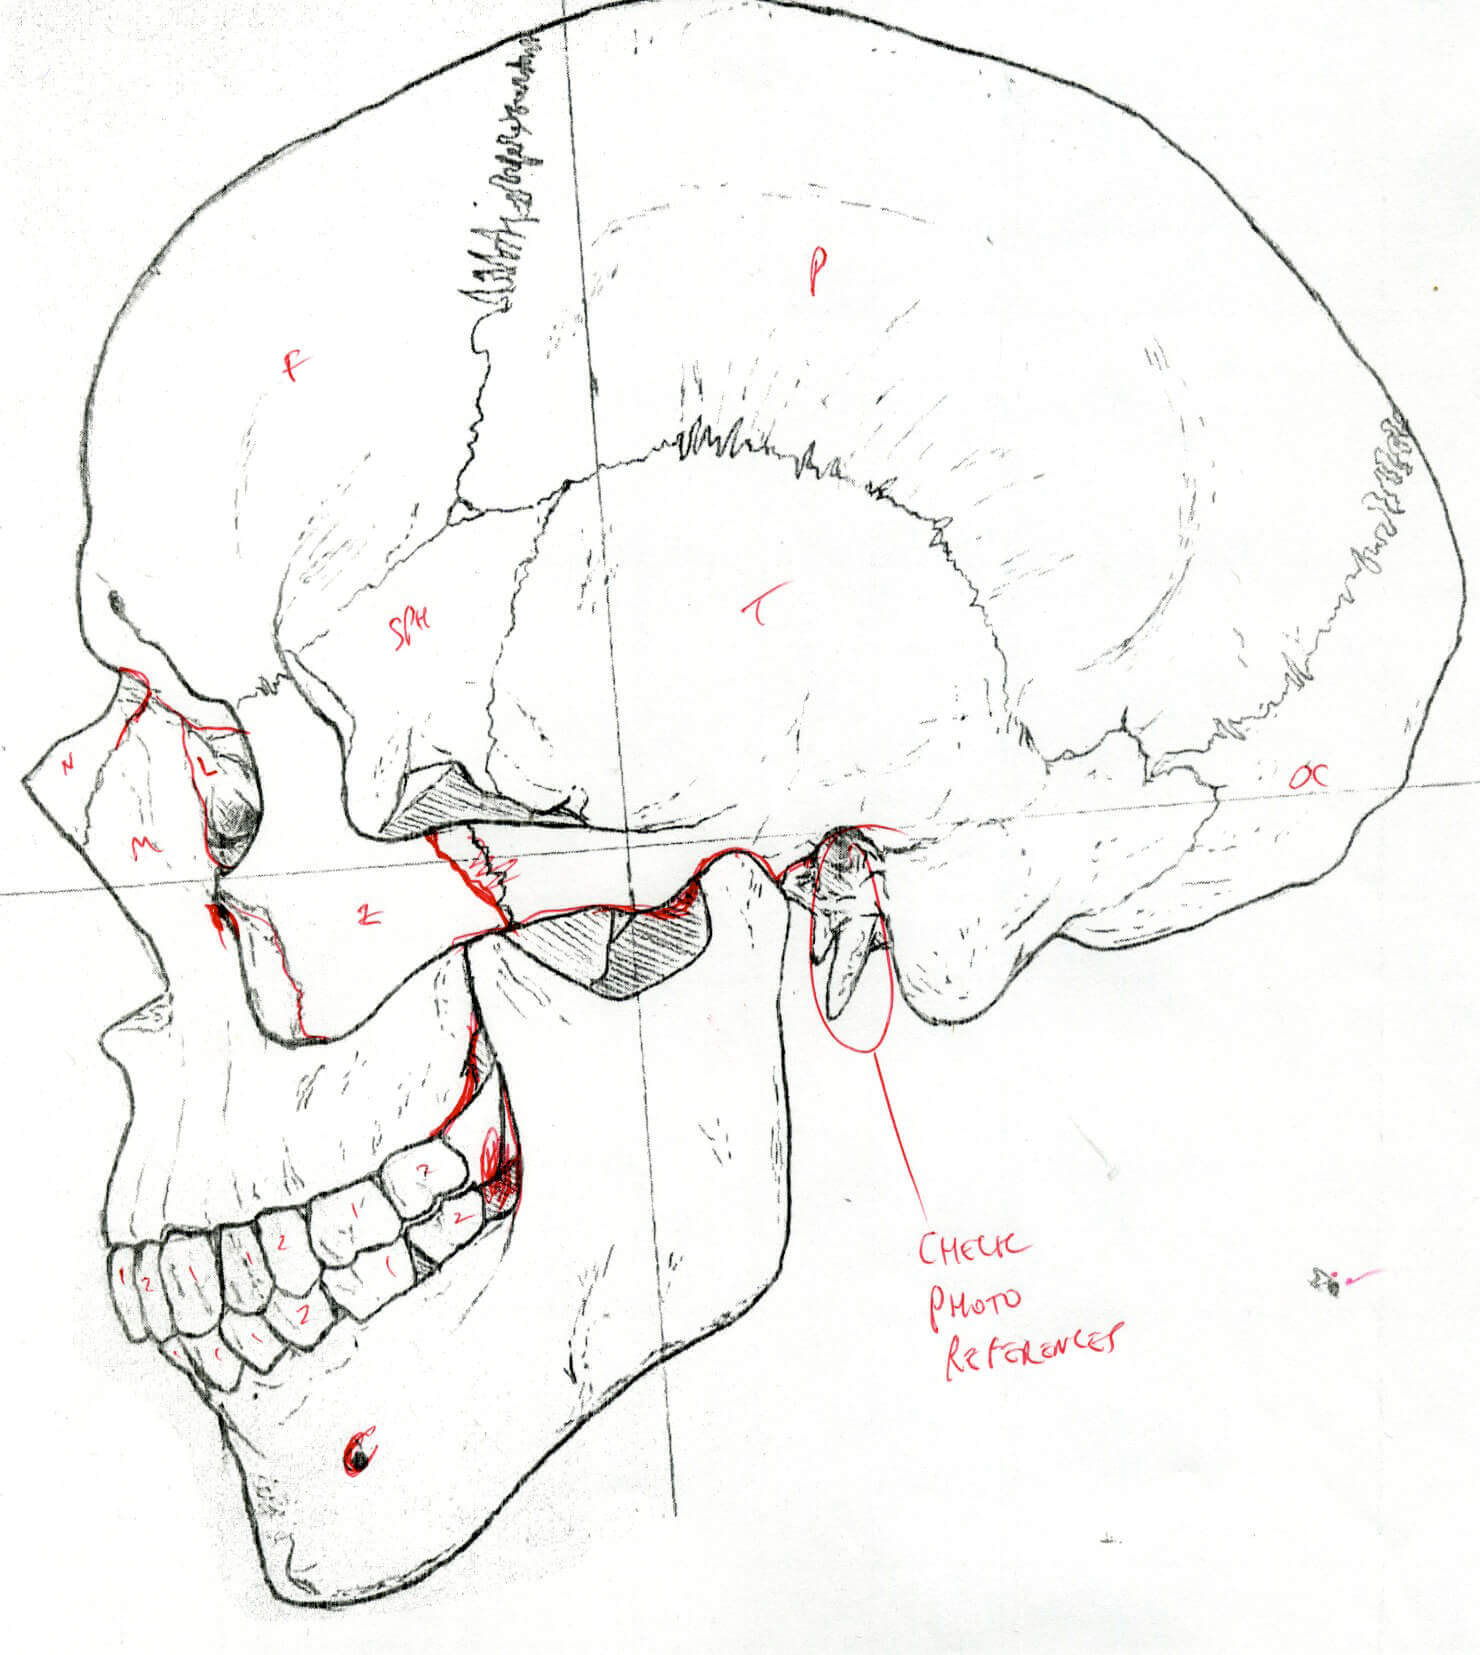 Initial line art of lateral skull with markup for changes